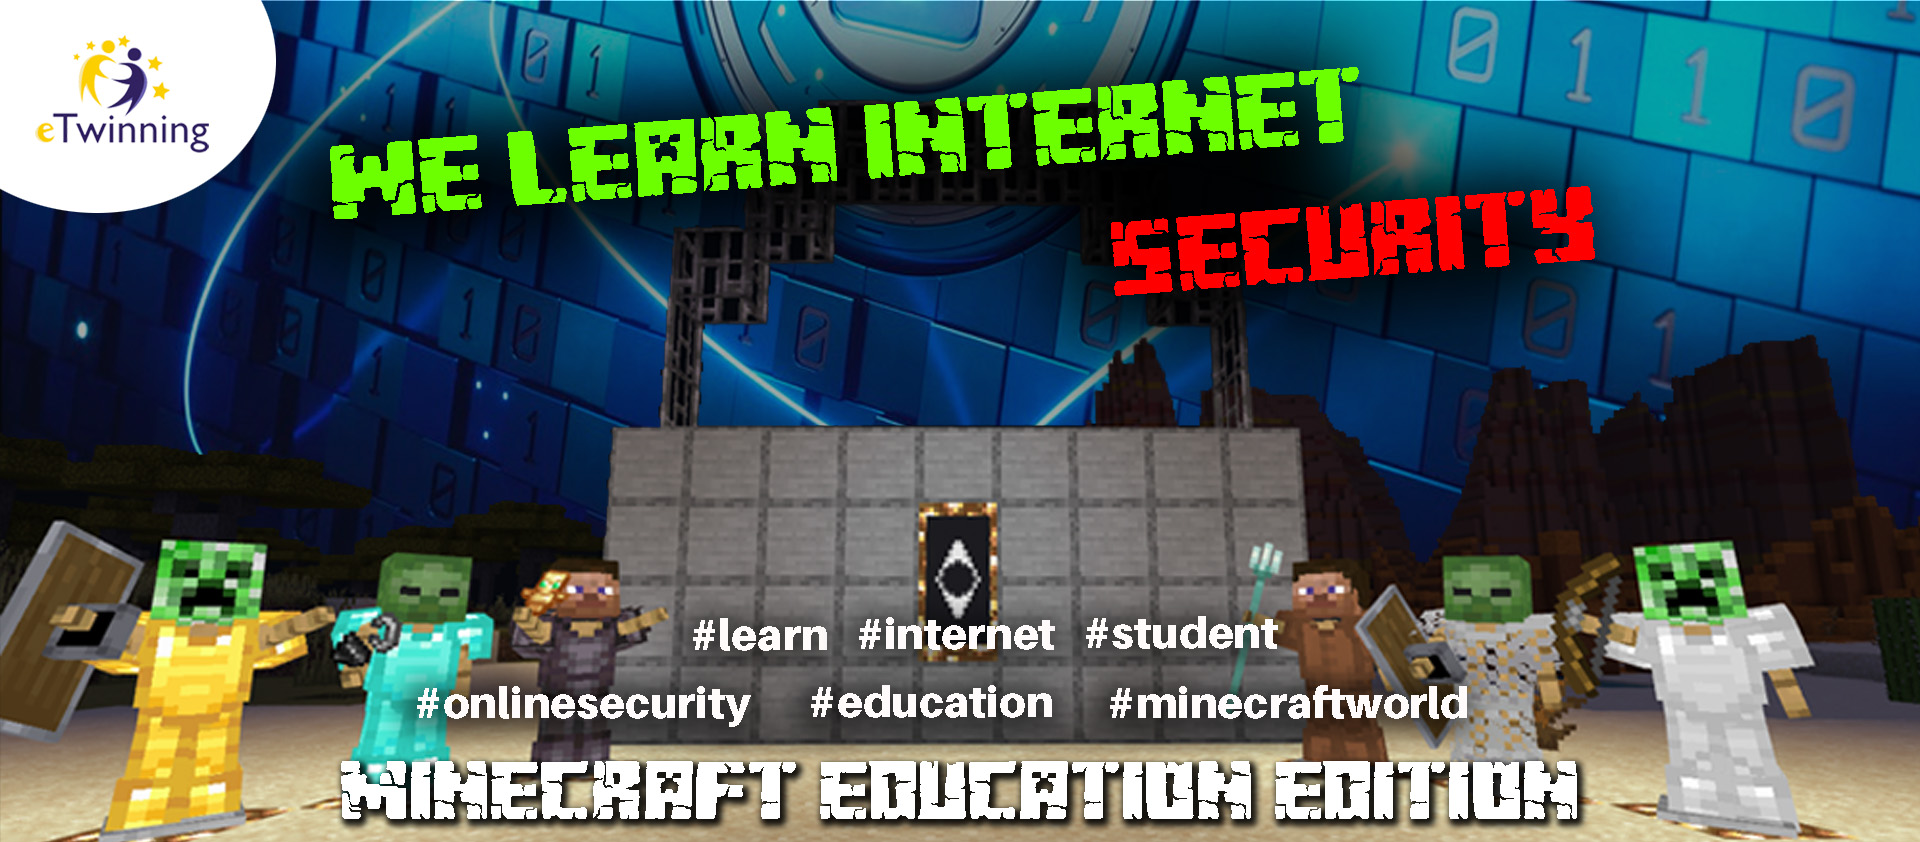 We learn internet security - Minecraft